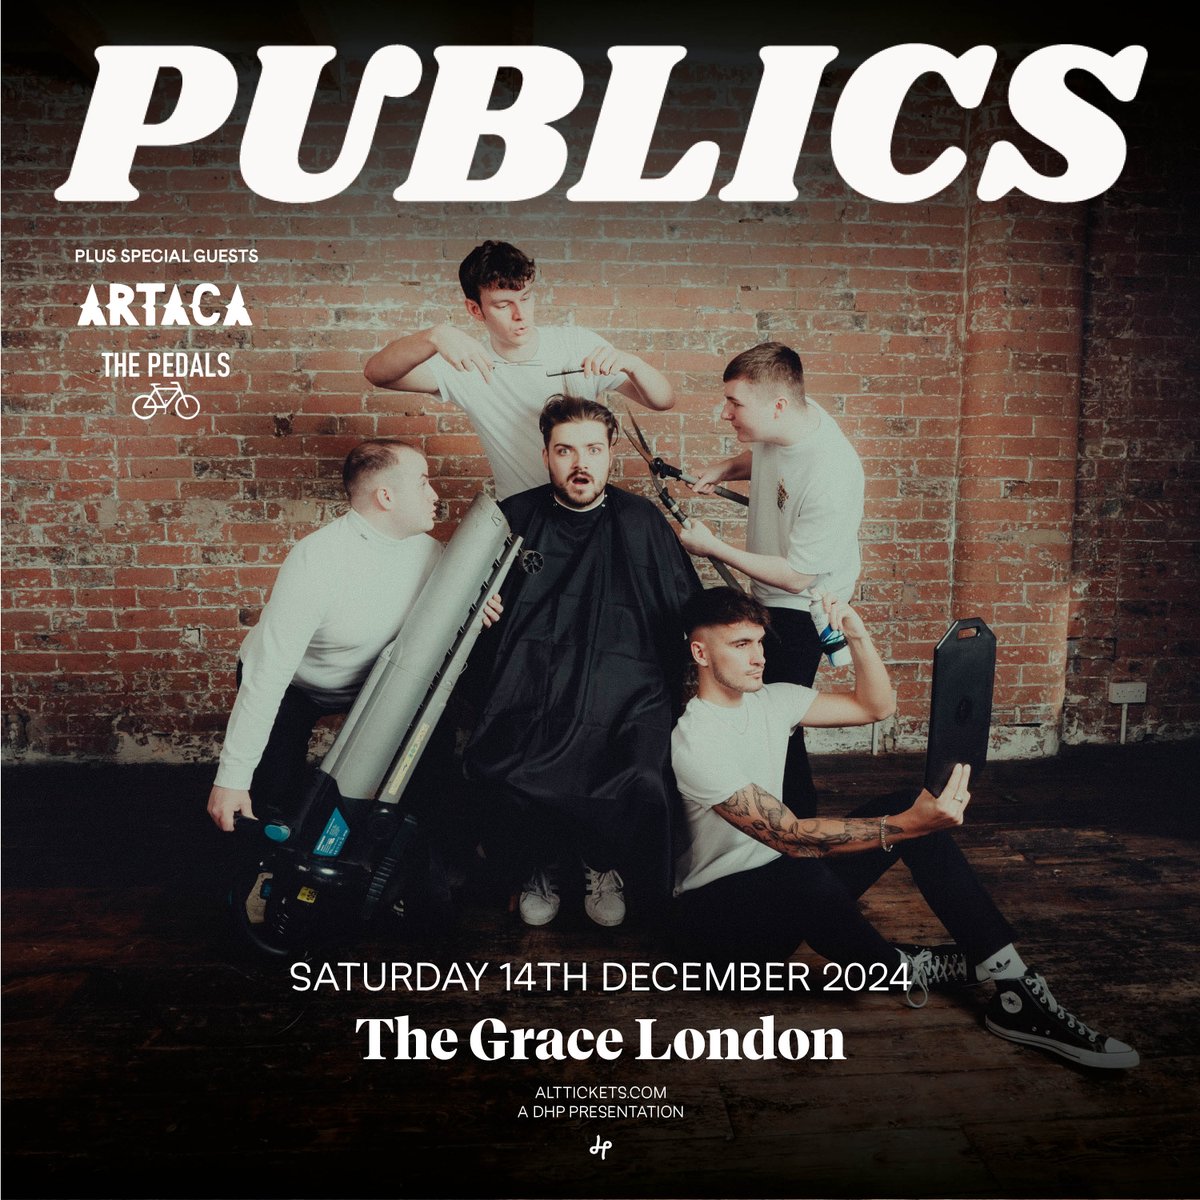 Powerhouse indie rock band @ThePublicsBand have announced a London date at @thegraceldn on Saturday 14th December alongside ARTACA and @thepedalsuk! Tickets go on sale this Friday at 10am, set a reminder: tinyurl.com/2xxrvwhv